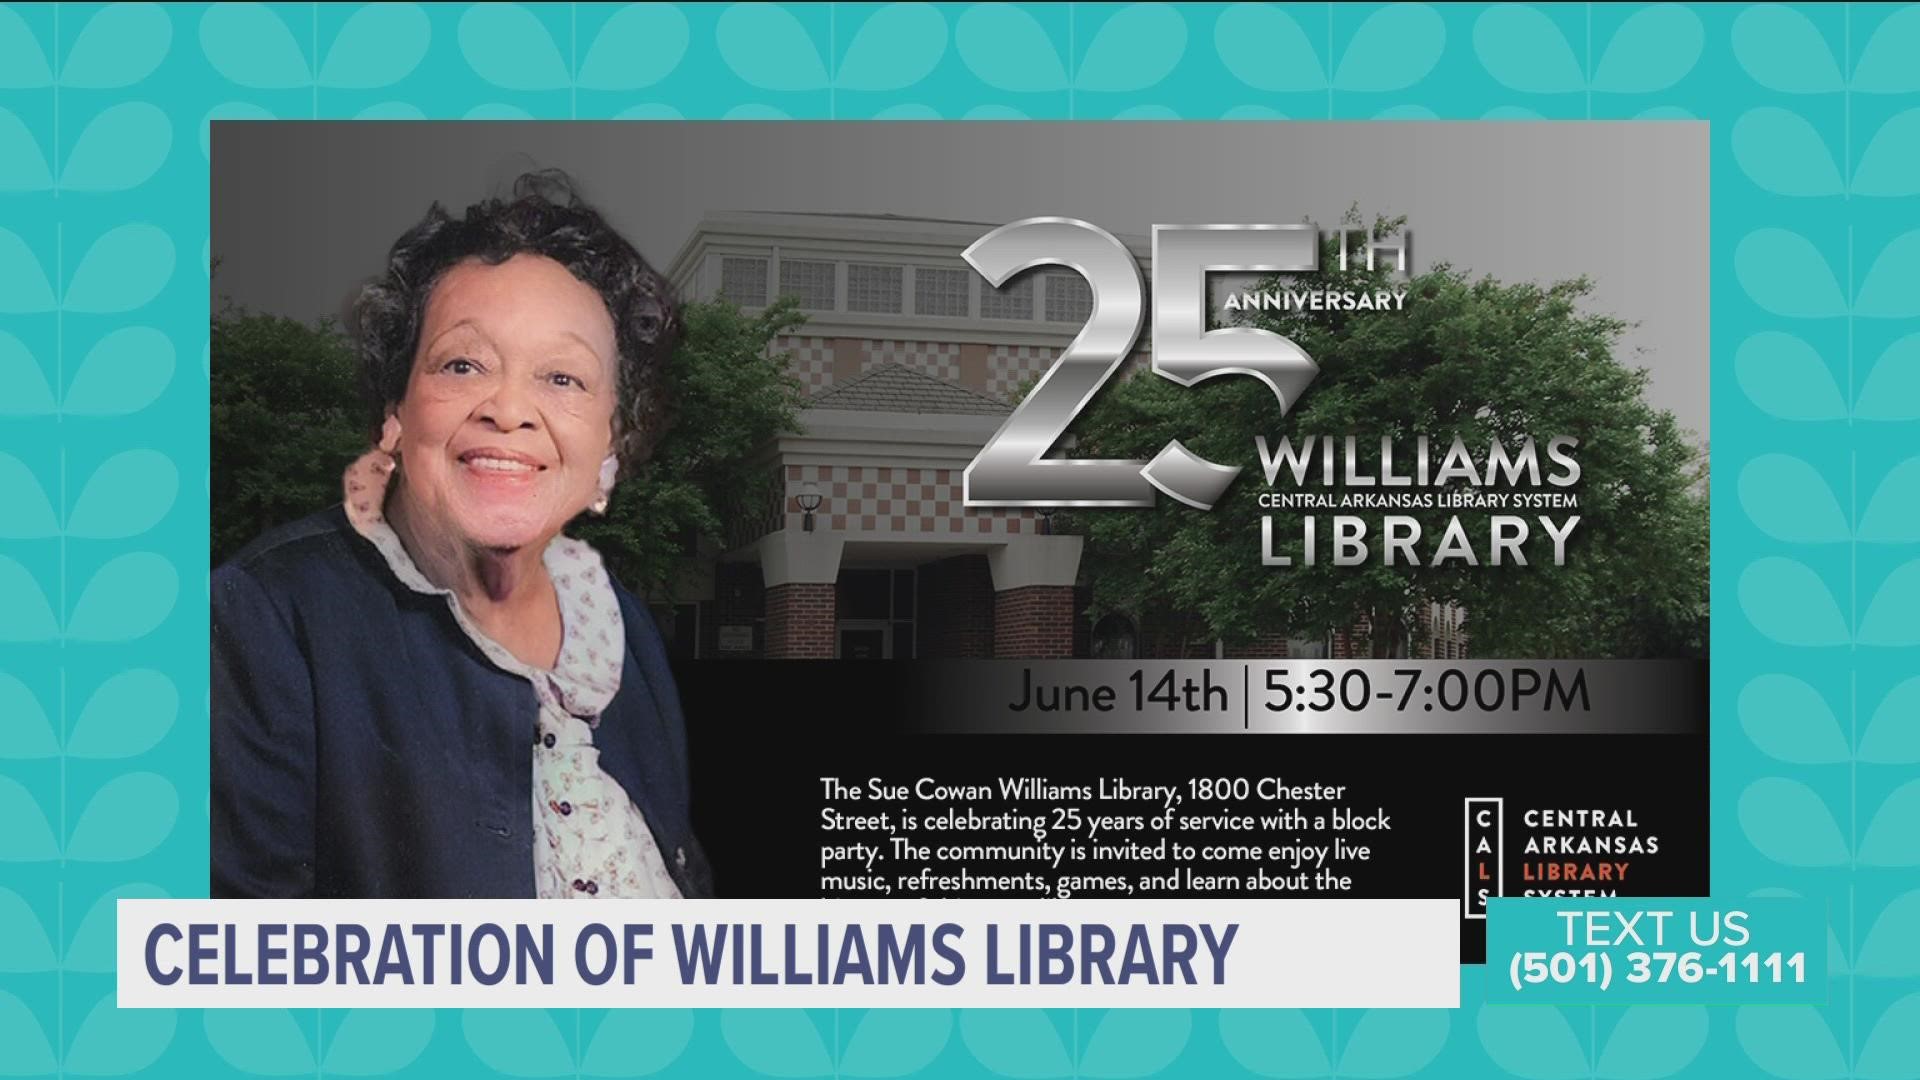 A special celebration is happening in the historic Dunbar neighborhood. CALS's Williams Library is celebrating its 25th anniversary with a block party.